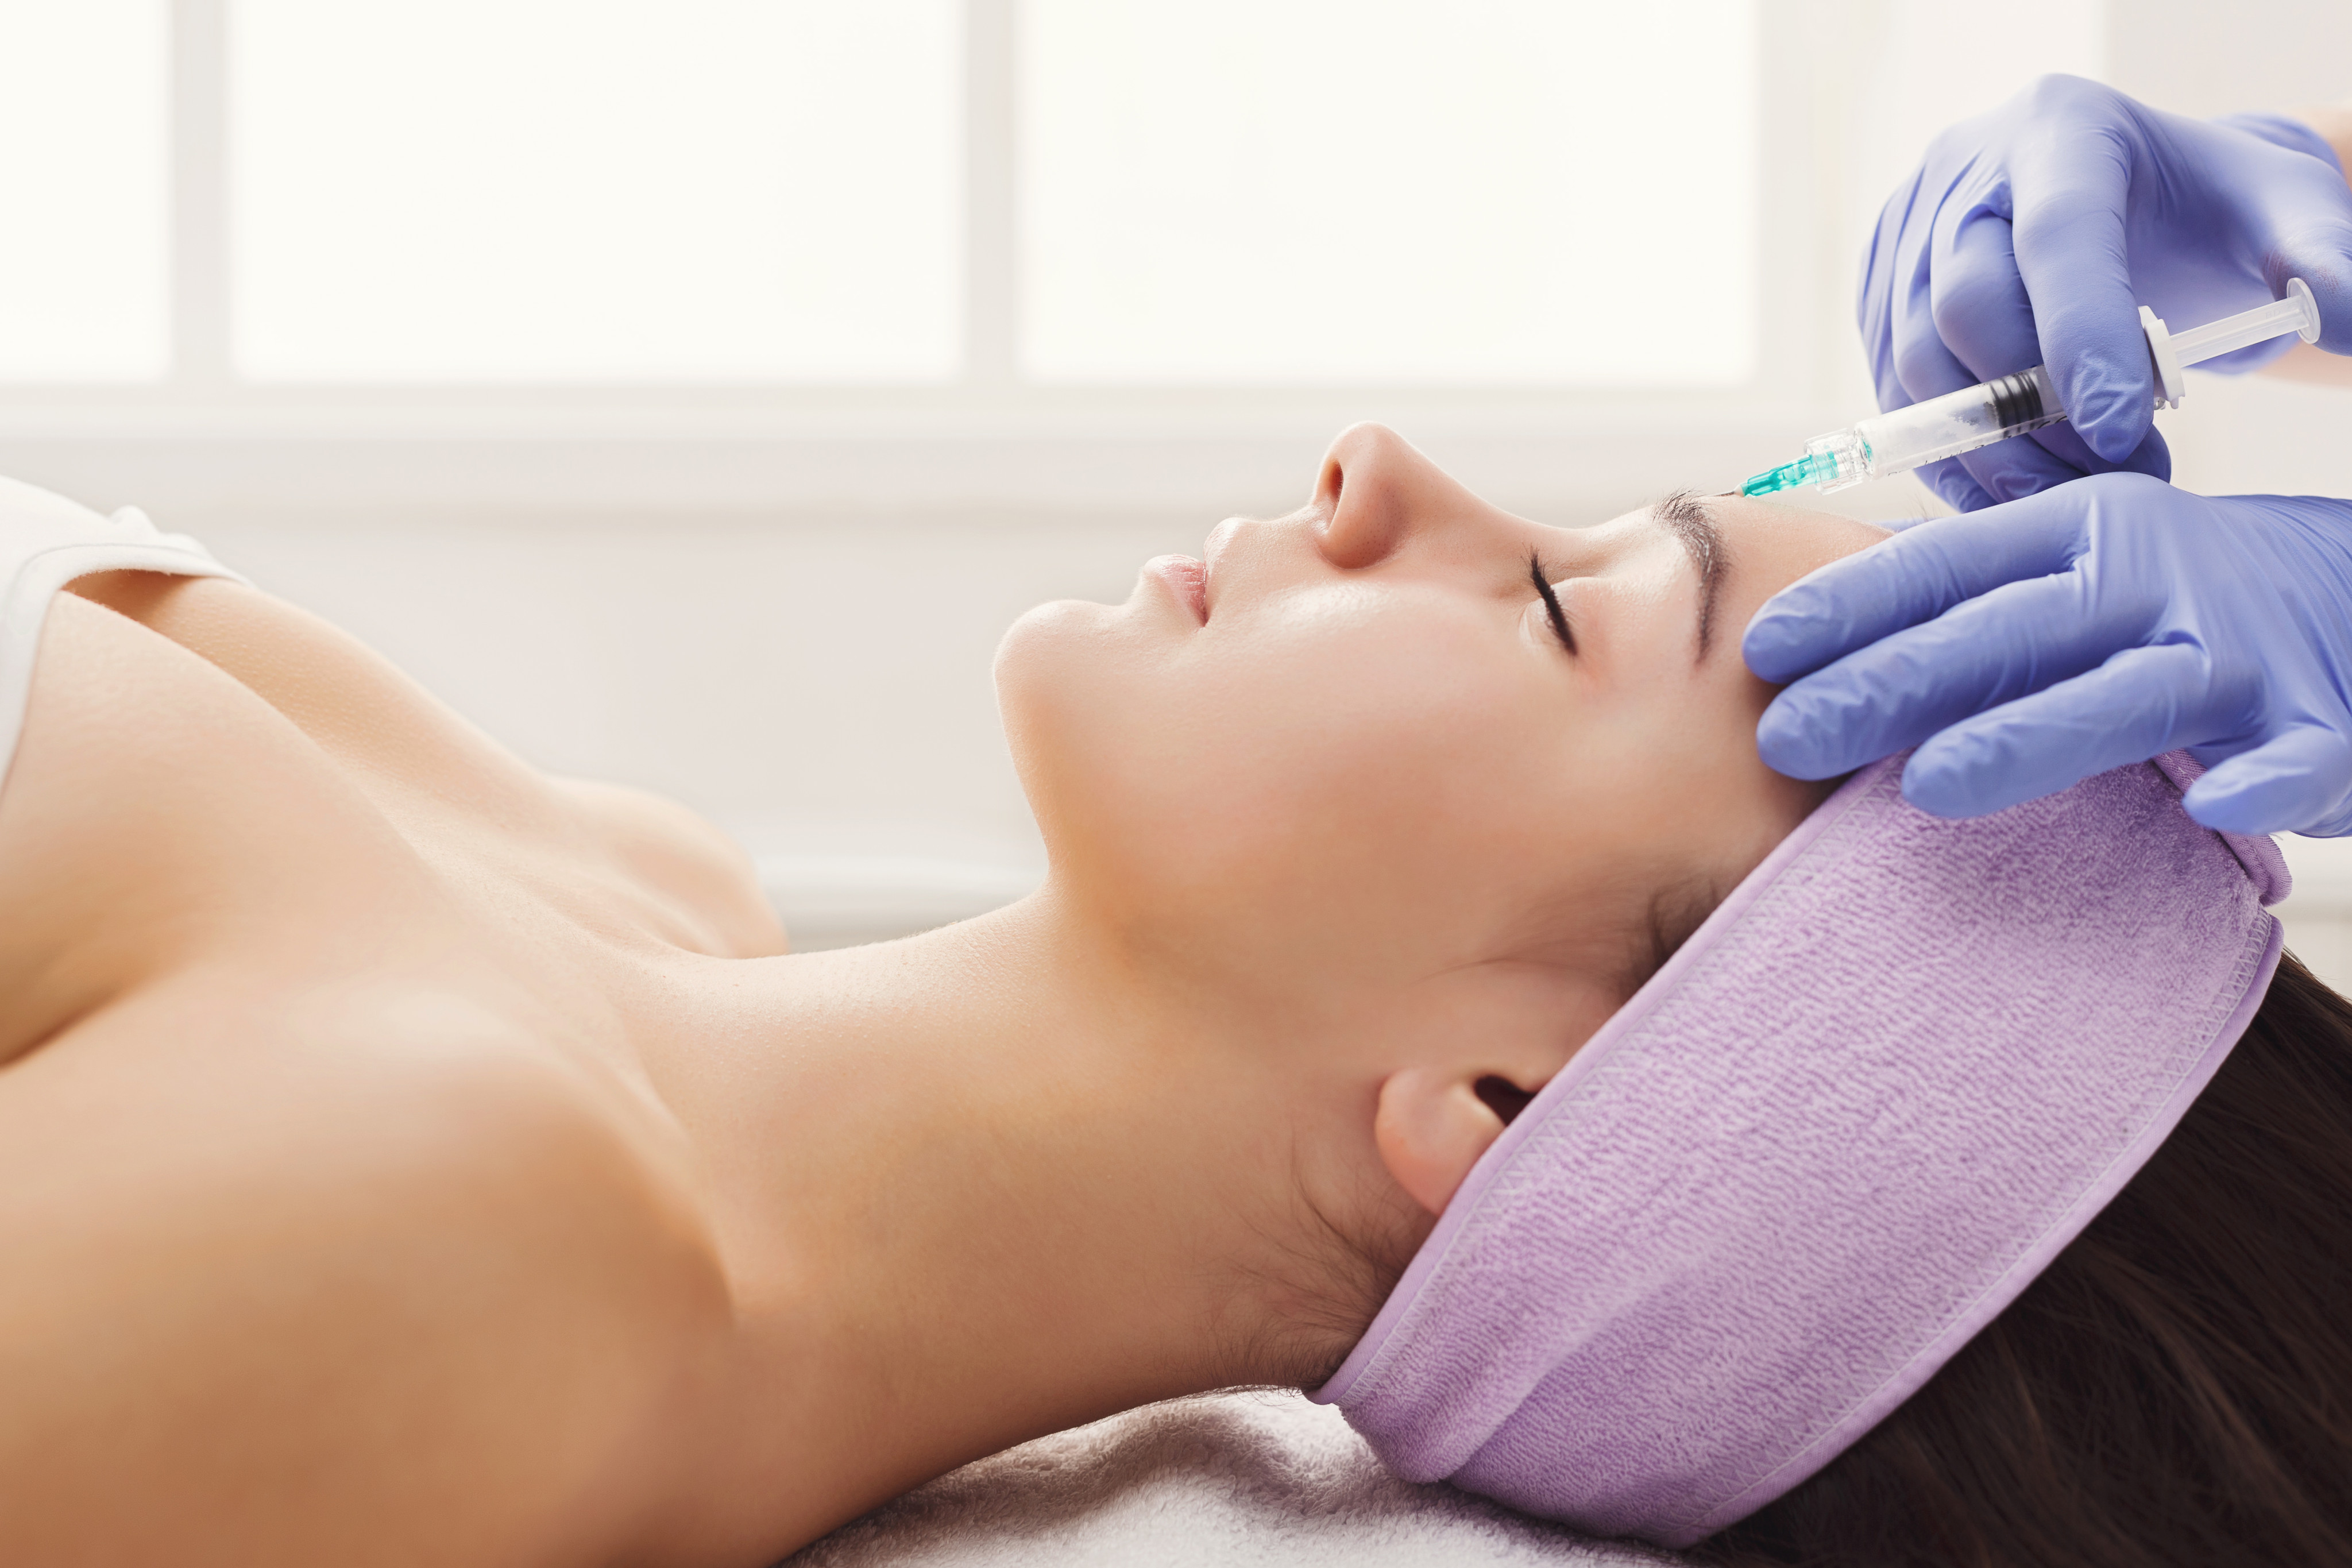 What are vampire facials and why are they linked to cases of HIV? Photo: Shutterstock